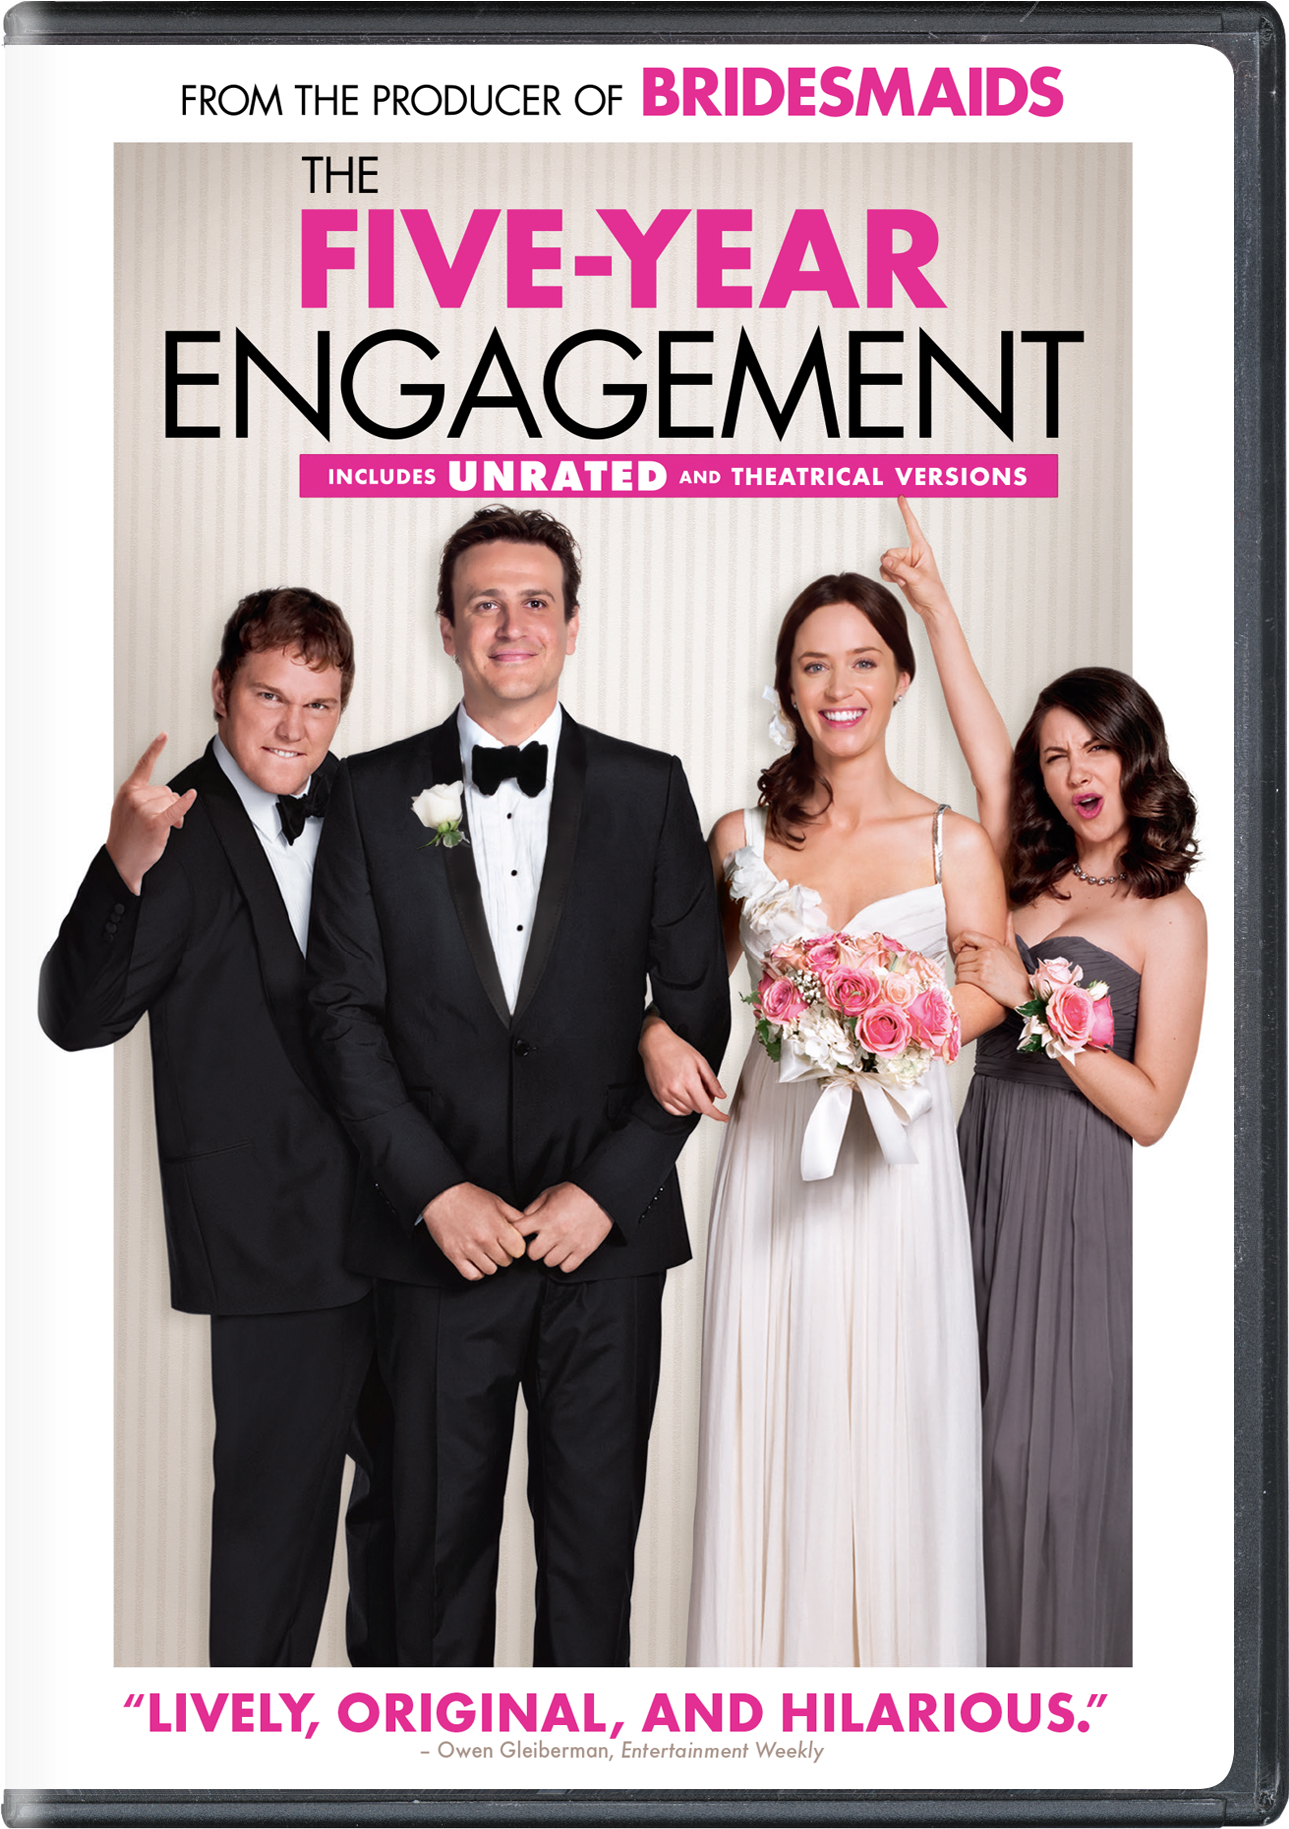 The Five-year Engagement - DVD [ 2012 ]  - Comedy Movies On DVD - Movies On GRUV